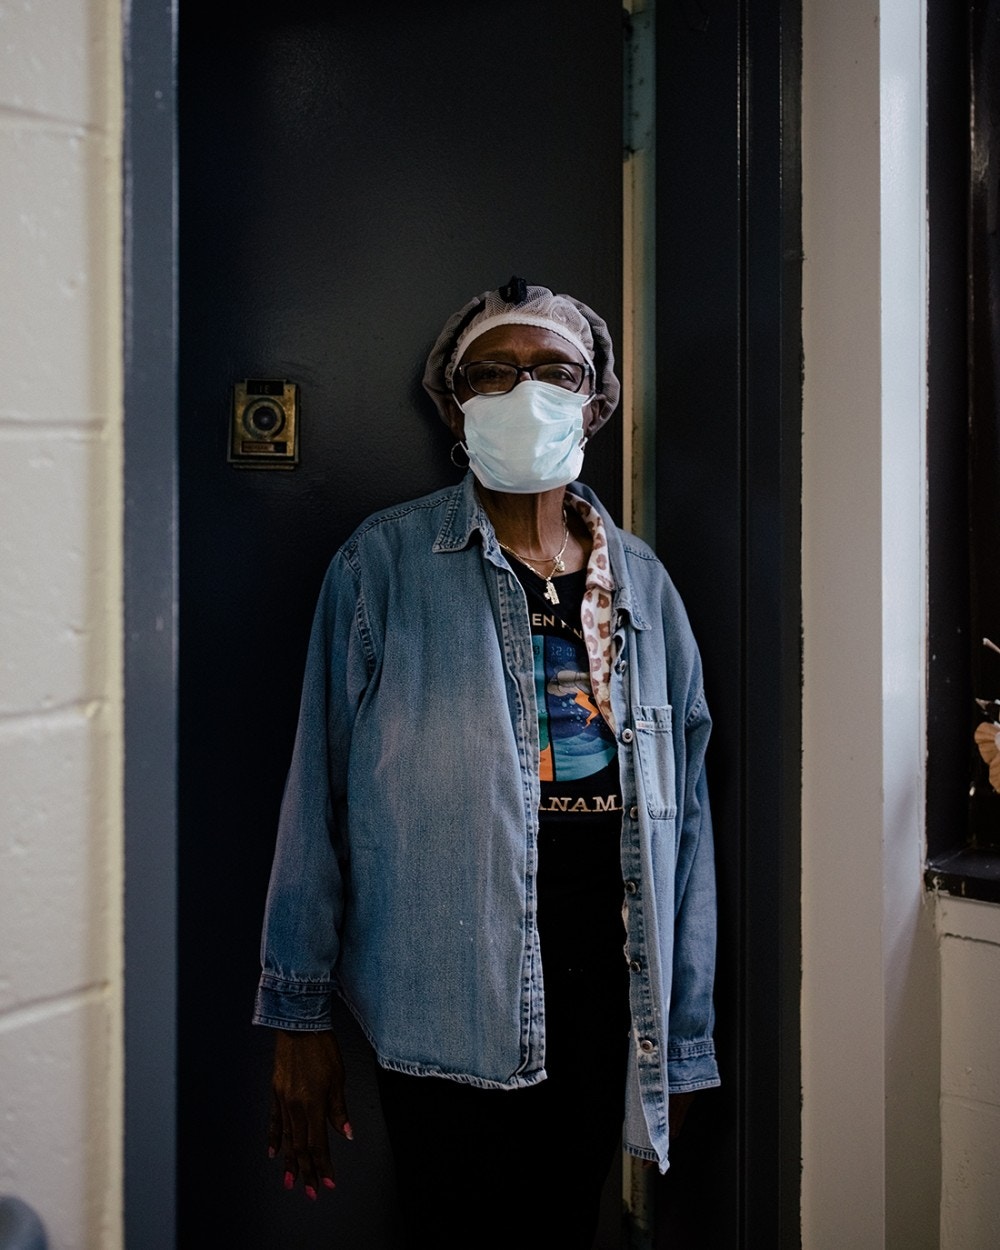 Annie Marcelle, a longtime resident at the Vandalia Avenue Houses, stands for a portrait outside of her 1st-floor residence in the senior-only housing in Canarsie, New York City, New York, U.S., May 29, 2020. José A. Alvarado Jr. for The Intercept